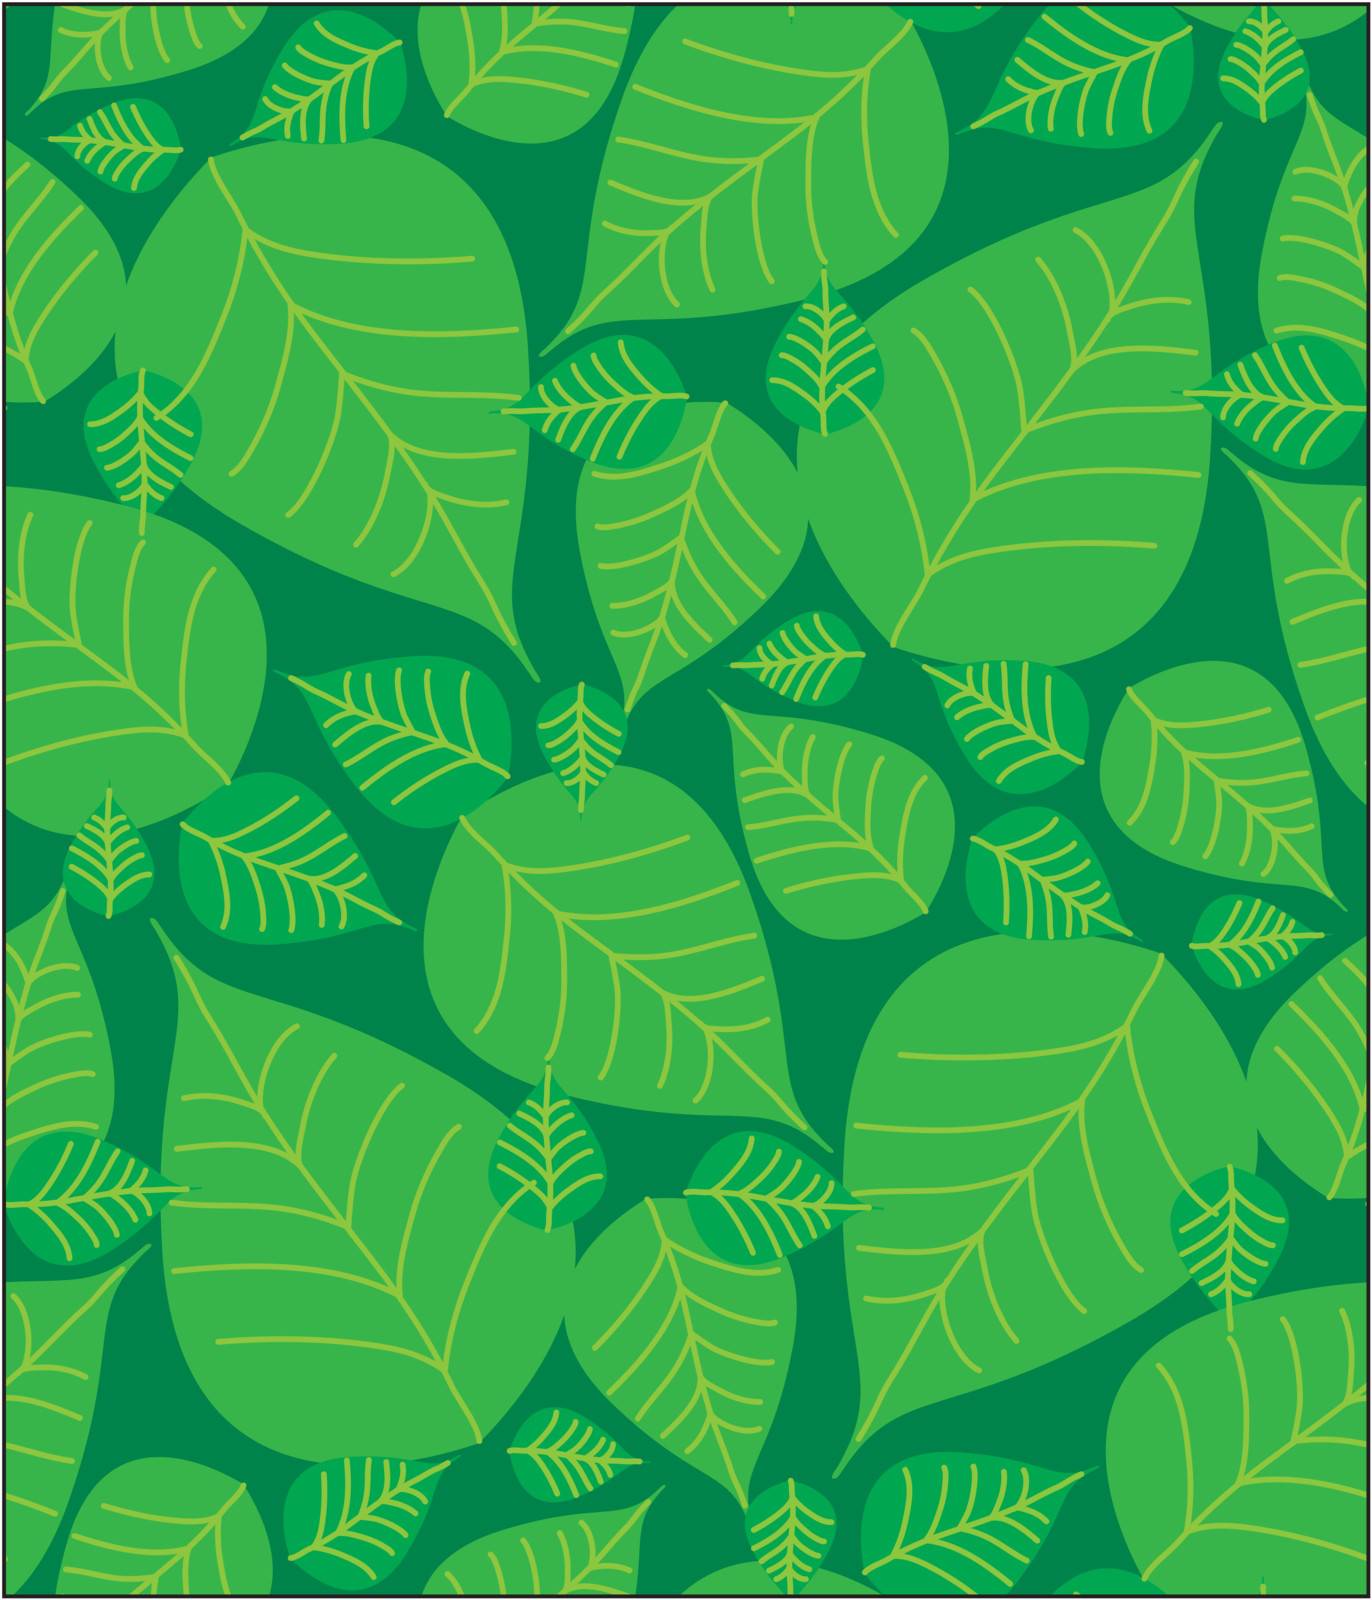 Foliage pattern with green leaves. Select all the art and drop it into your swatches palette to create an Adobe Illustrator pattern.